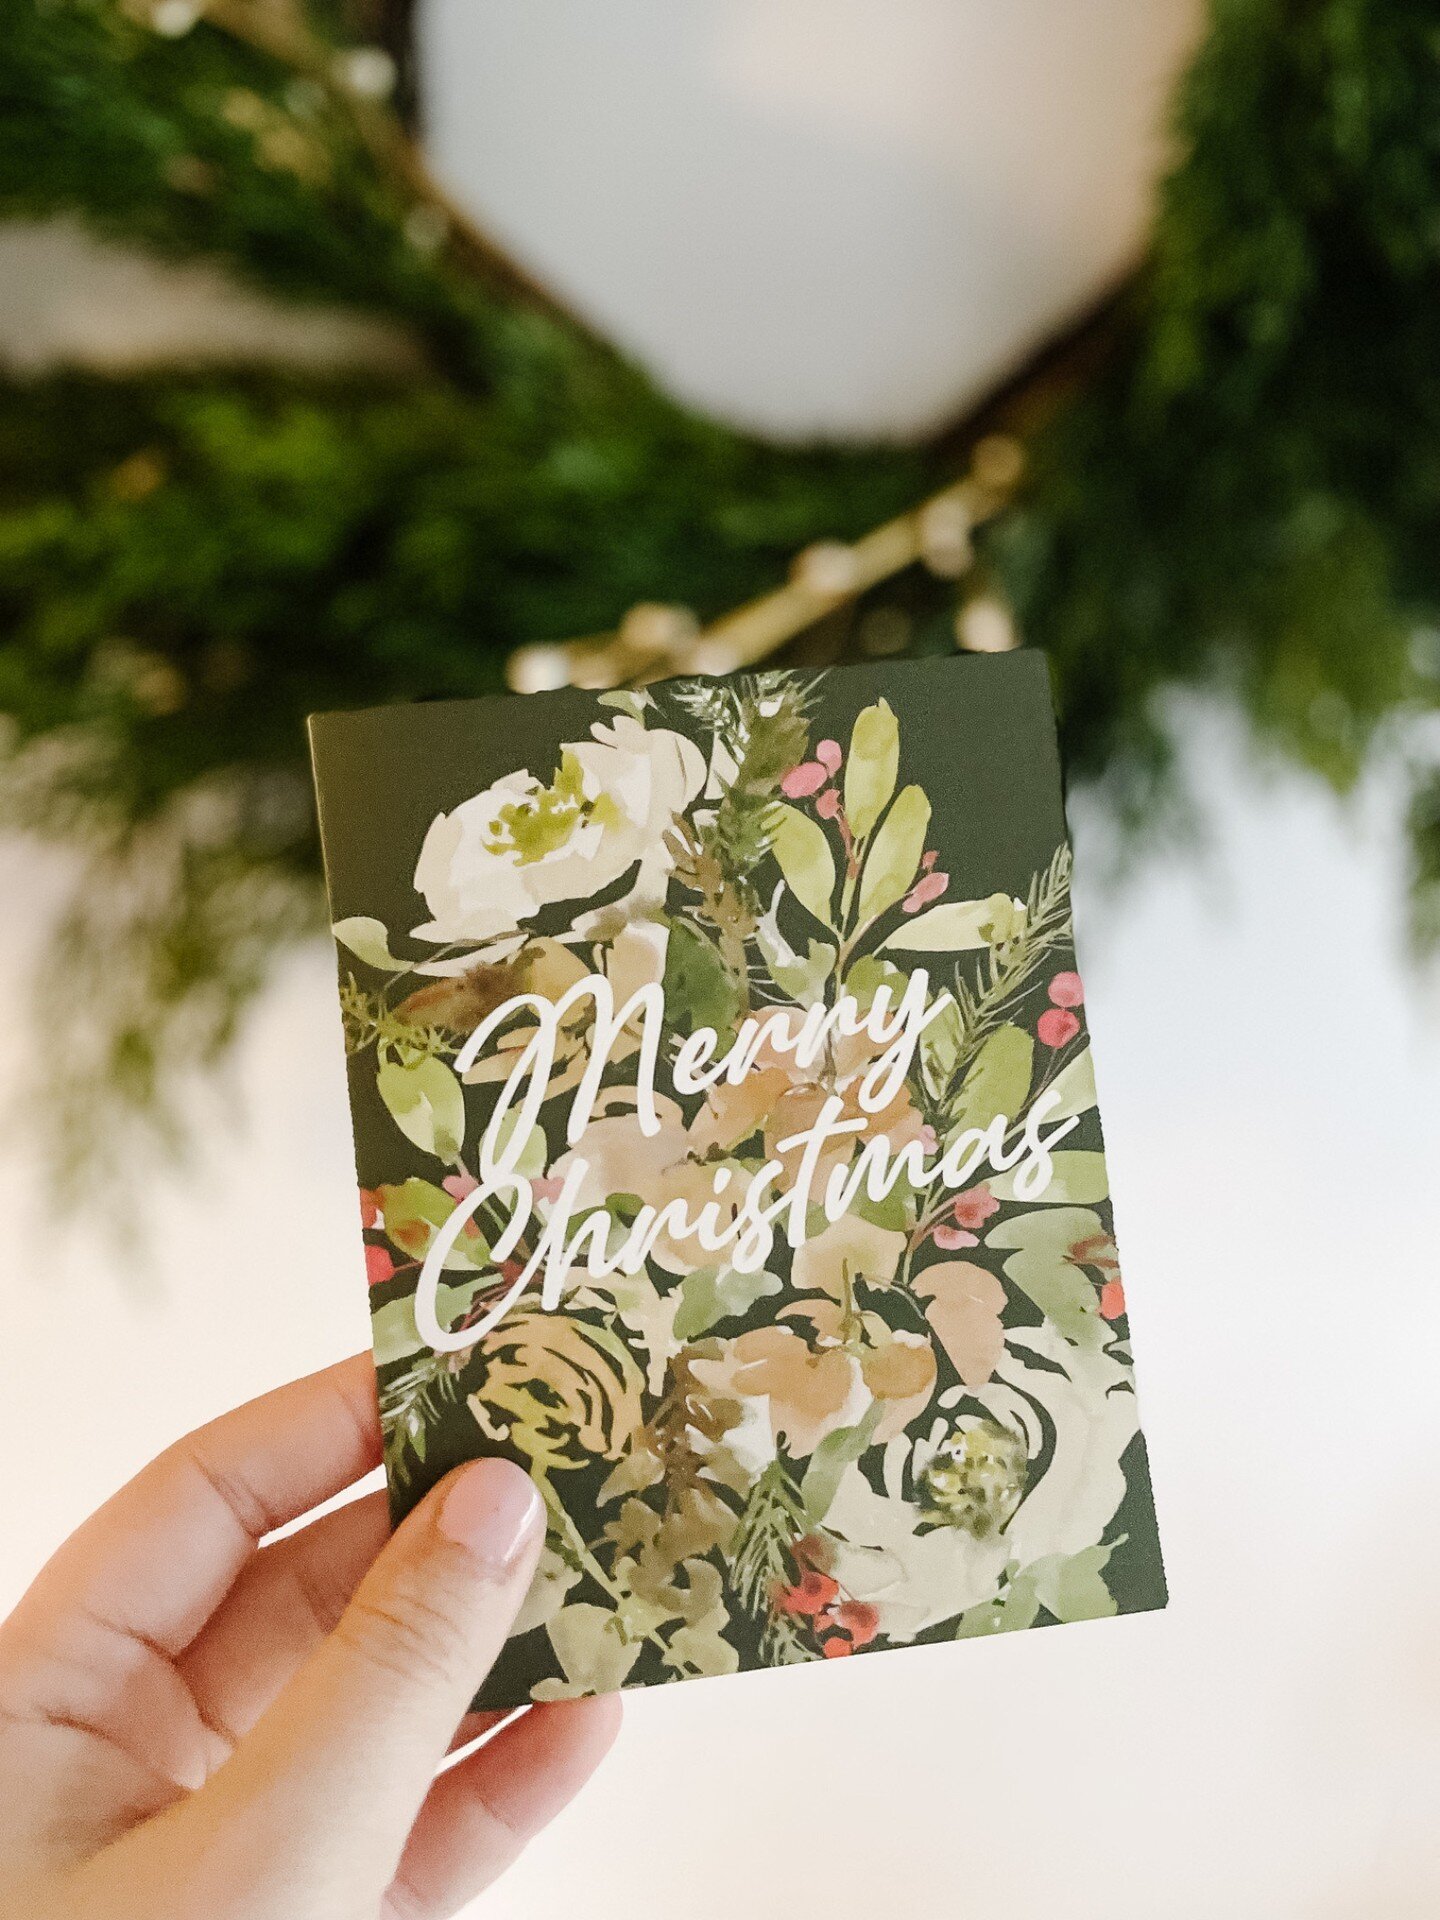 There is still time to plan and send your Christmas cards for the holiday!!

I offer individual single cards, premade sets, and the option to build your own box set if you shop with me in person!

All cards are blank inside, perfect for customization